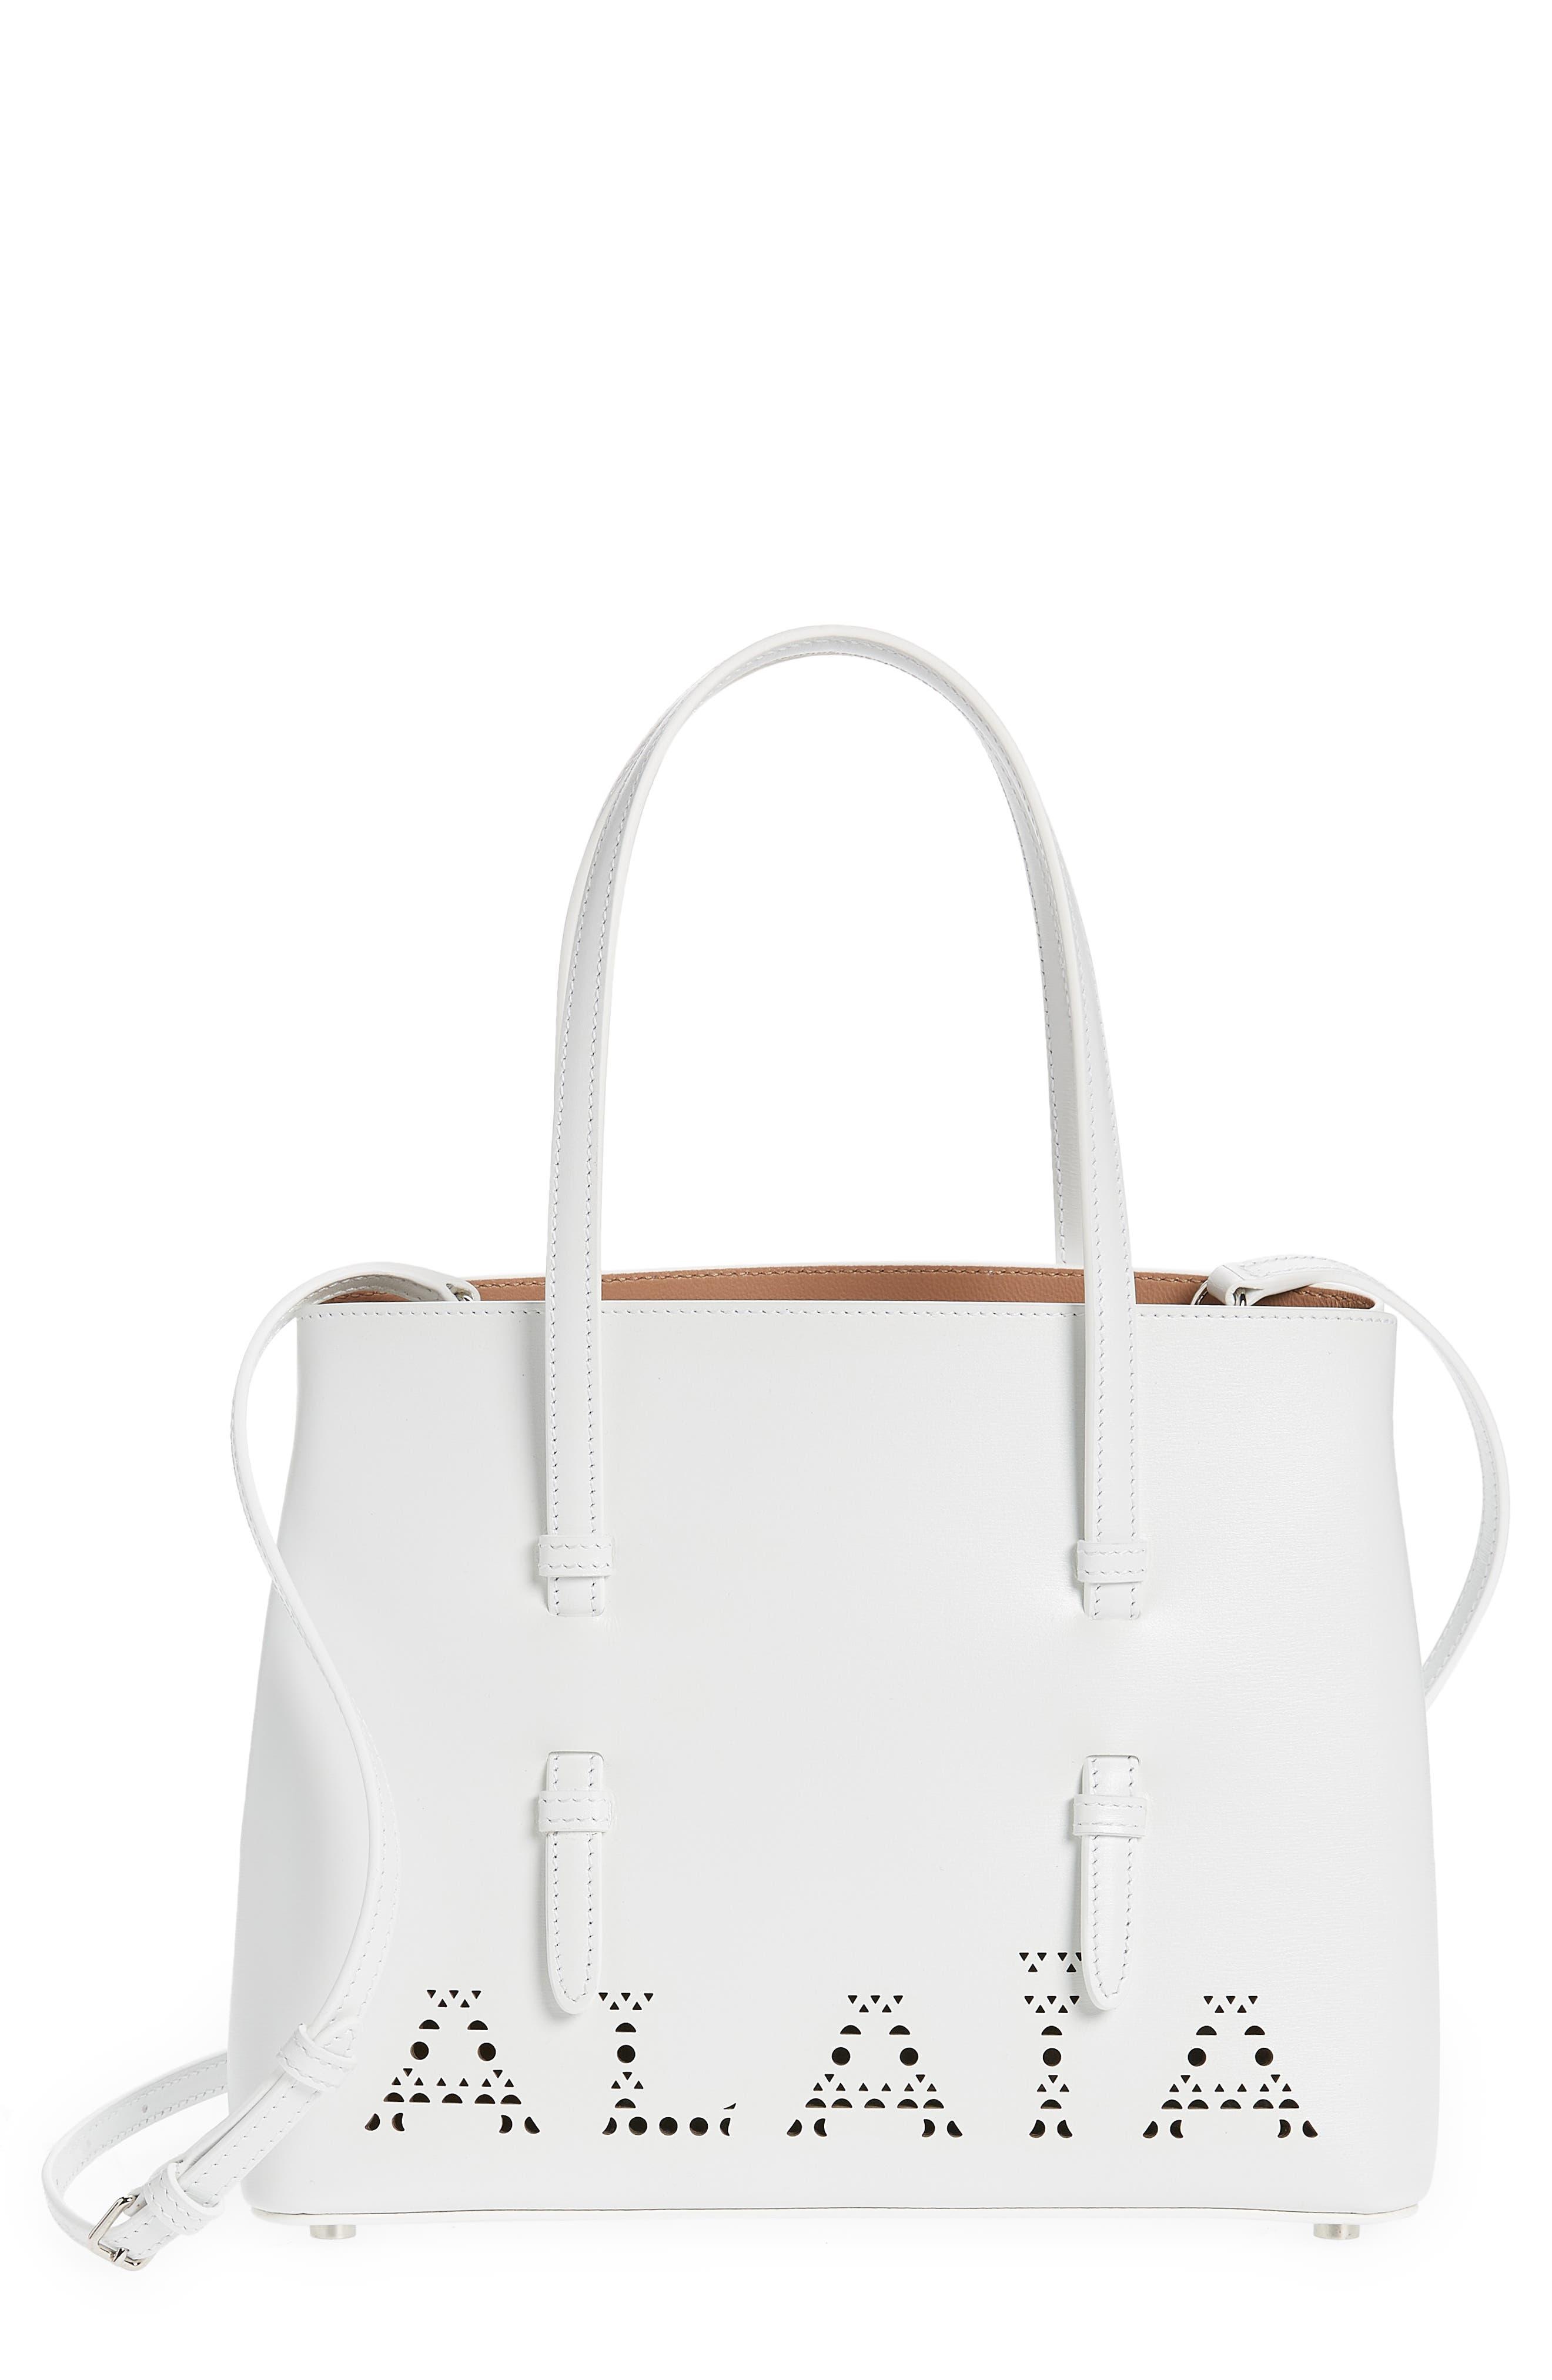 Alaïa Mina 25 Perforated Logo Leather Bag in White | Lyst